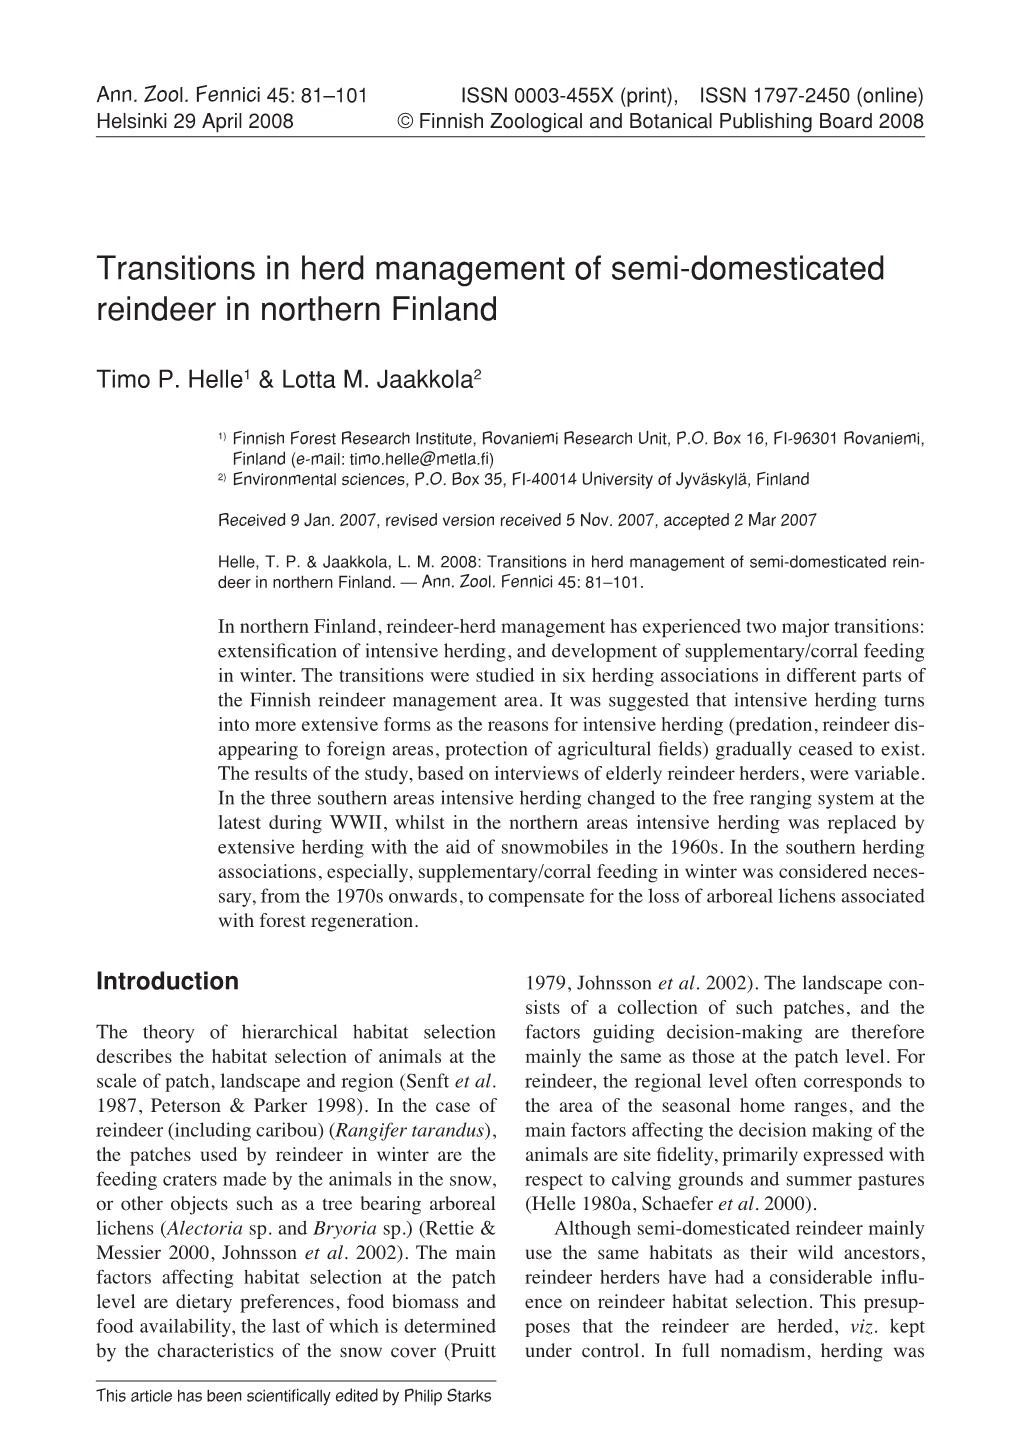 Transitions in Herd Management of Semi-Domesticated Reindeer in Northern Finland